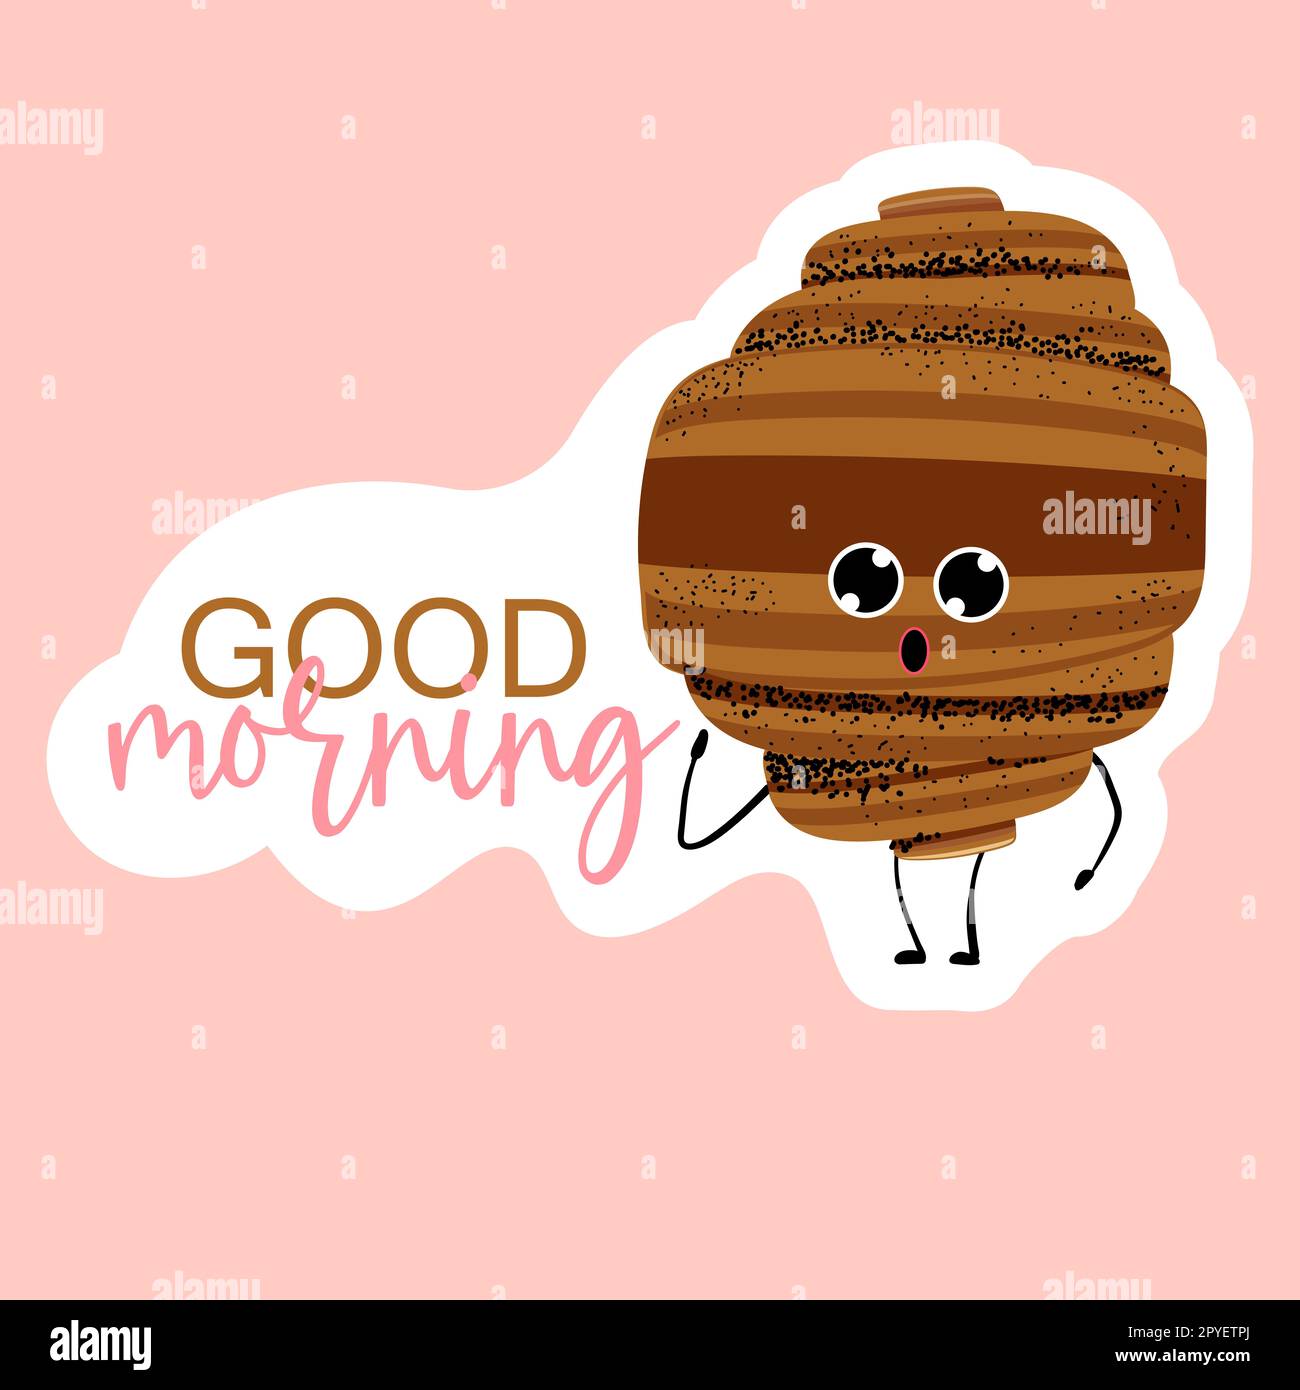 Good morning sticker. Croissant. Croissant day sticker.Vector illustration of bakery and pastries Stock Photo